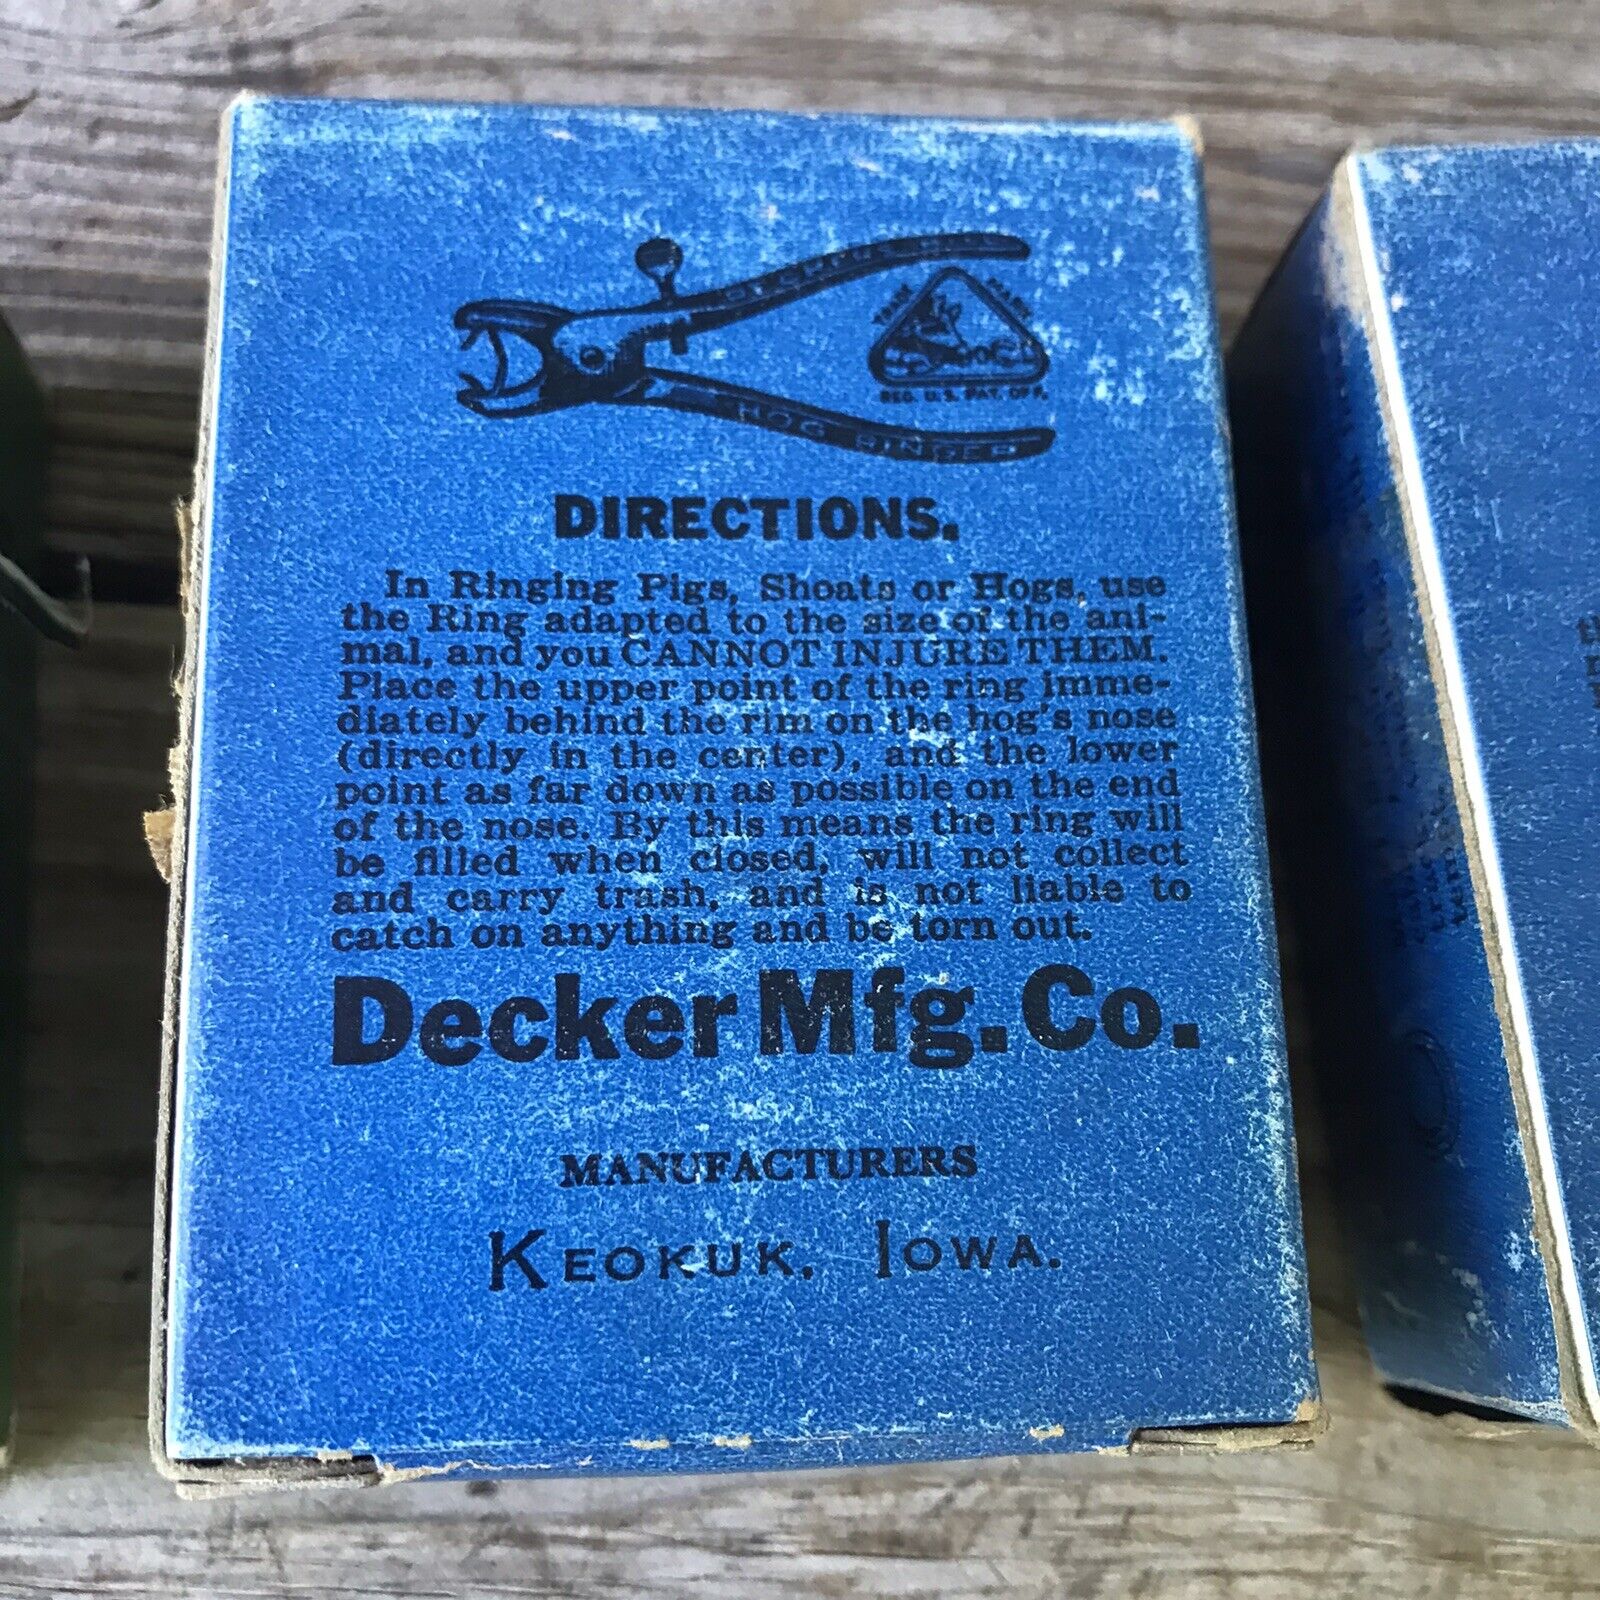 Lot 3 Vintage Decker’s Hump Hill’s Hog Rings No. 2 & 3 Boxes NOS Decker Manufacturing Company Does Not Apply - фотография #7